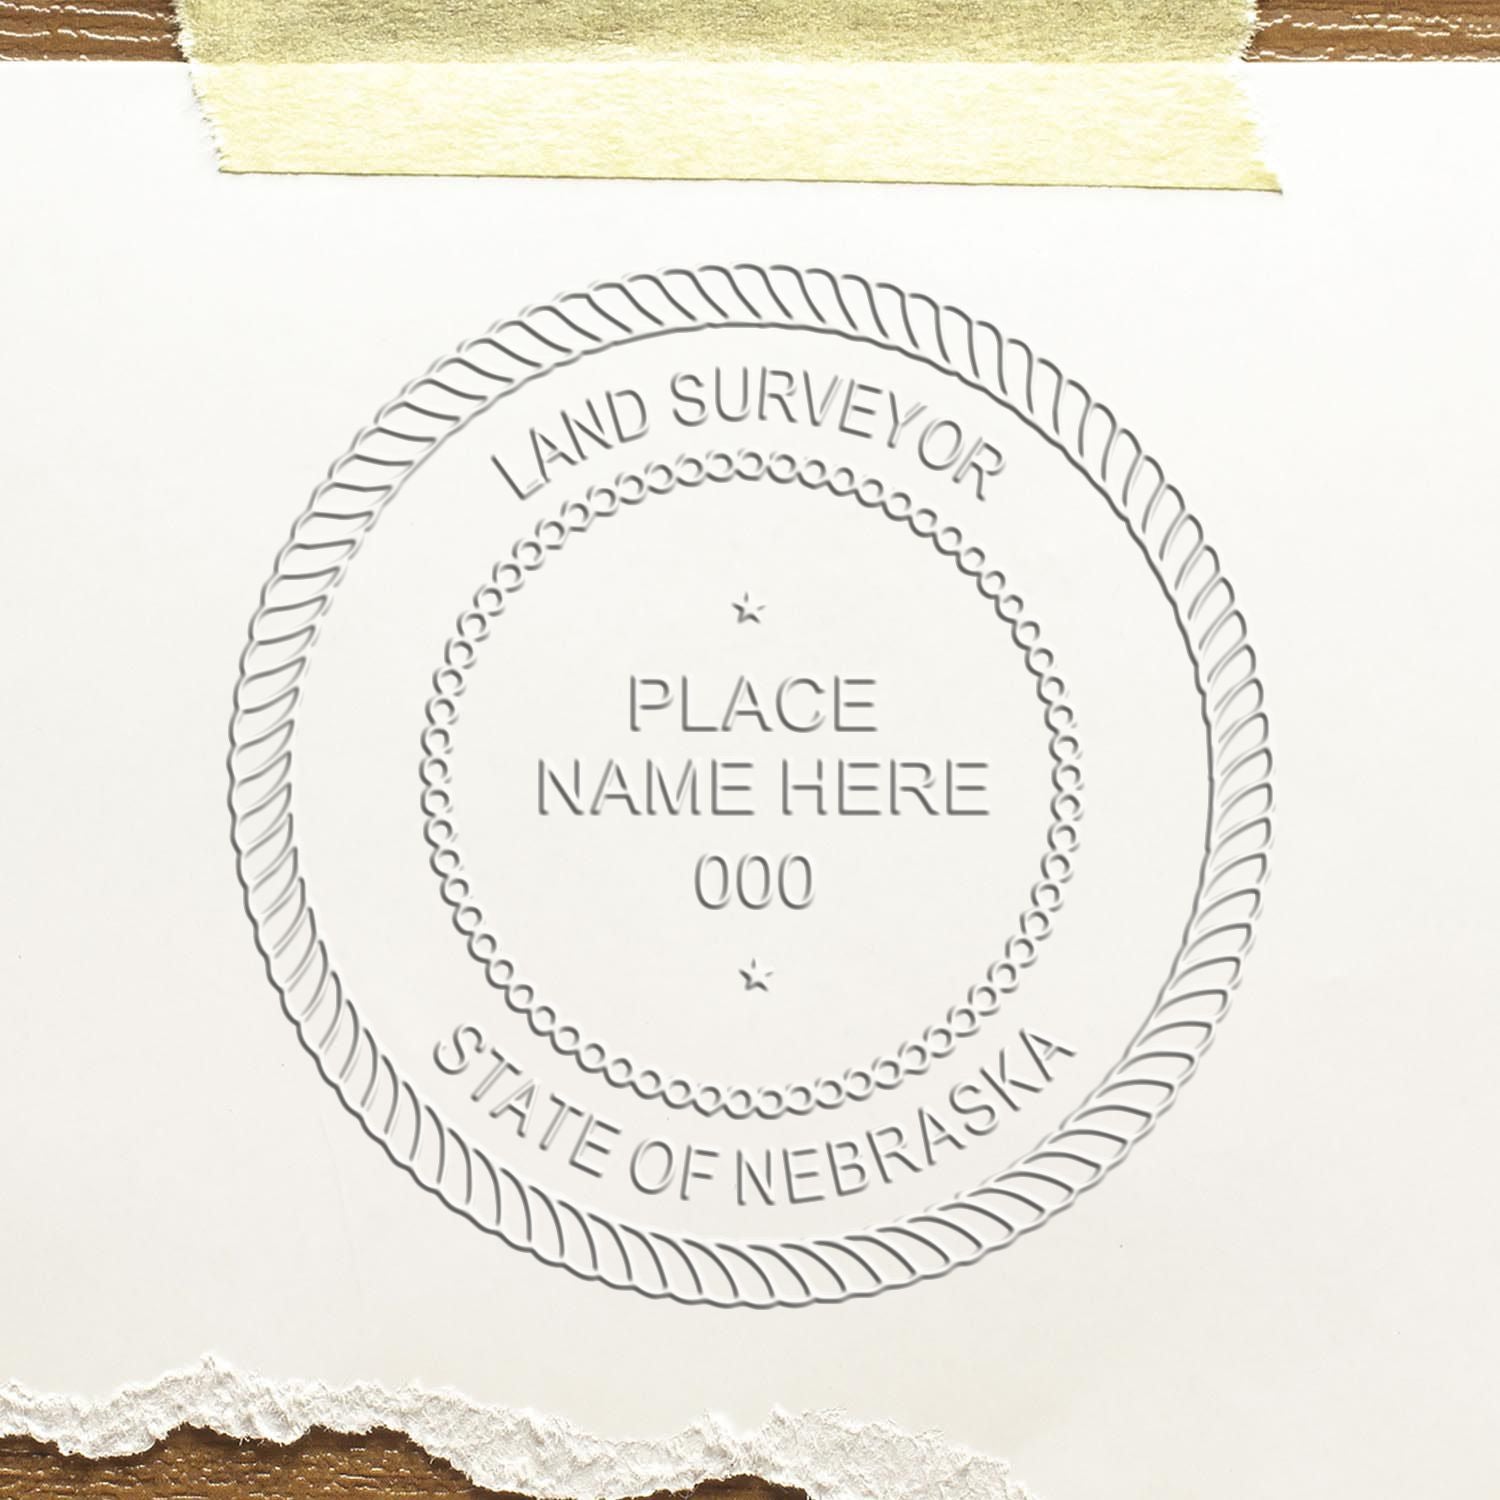 The main image for the Handheld Nebraska Land Surveyor Seal depicting a sample of the imprint and electronic files